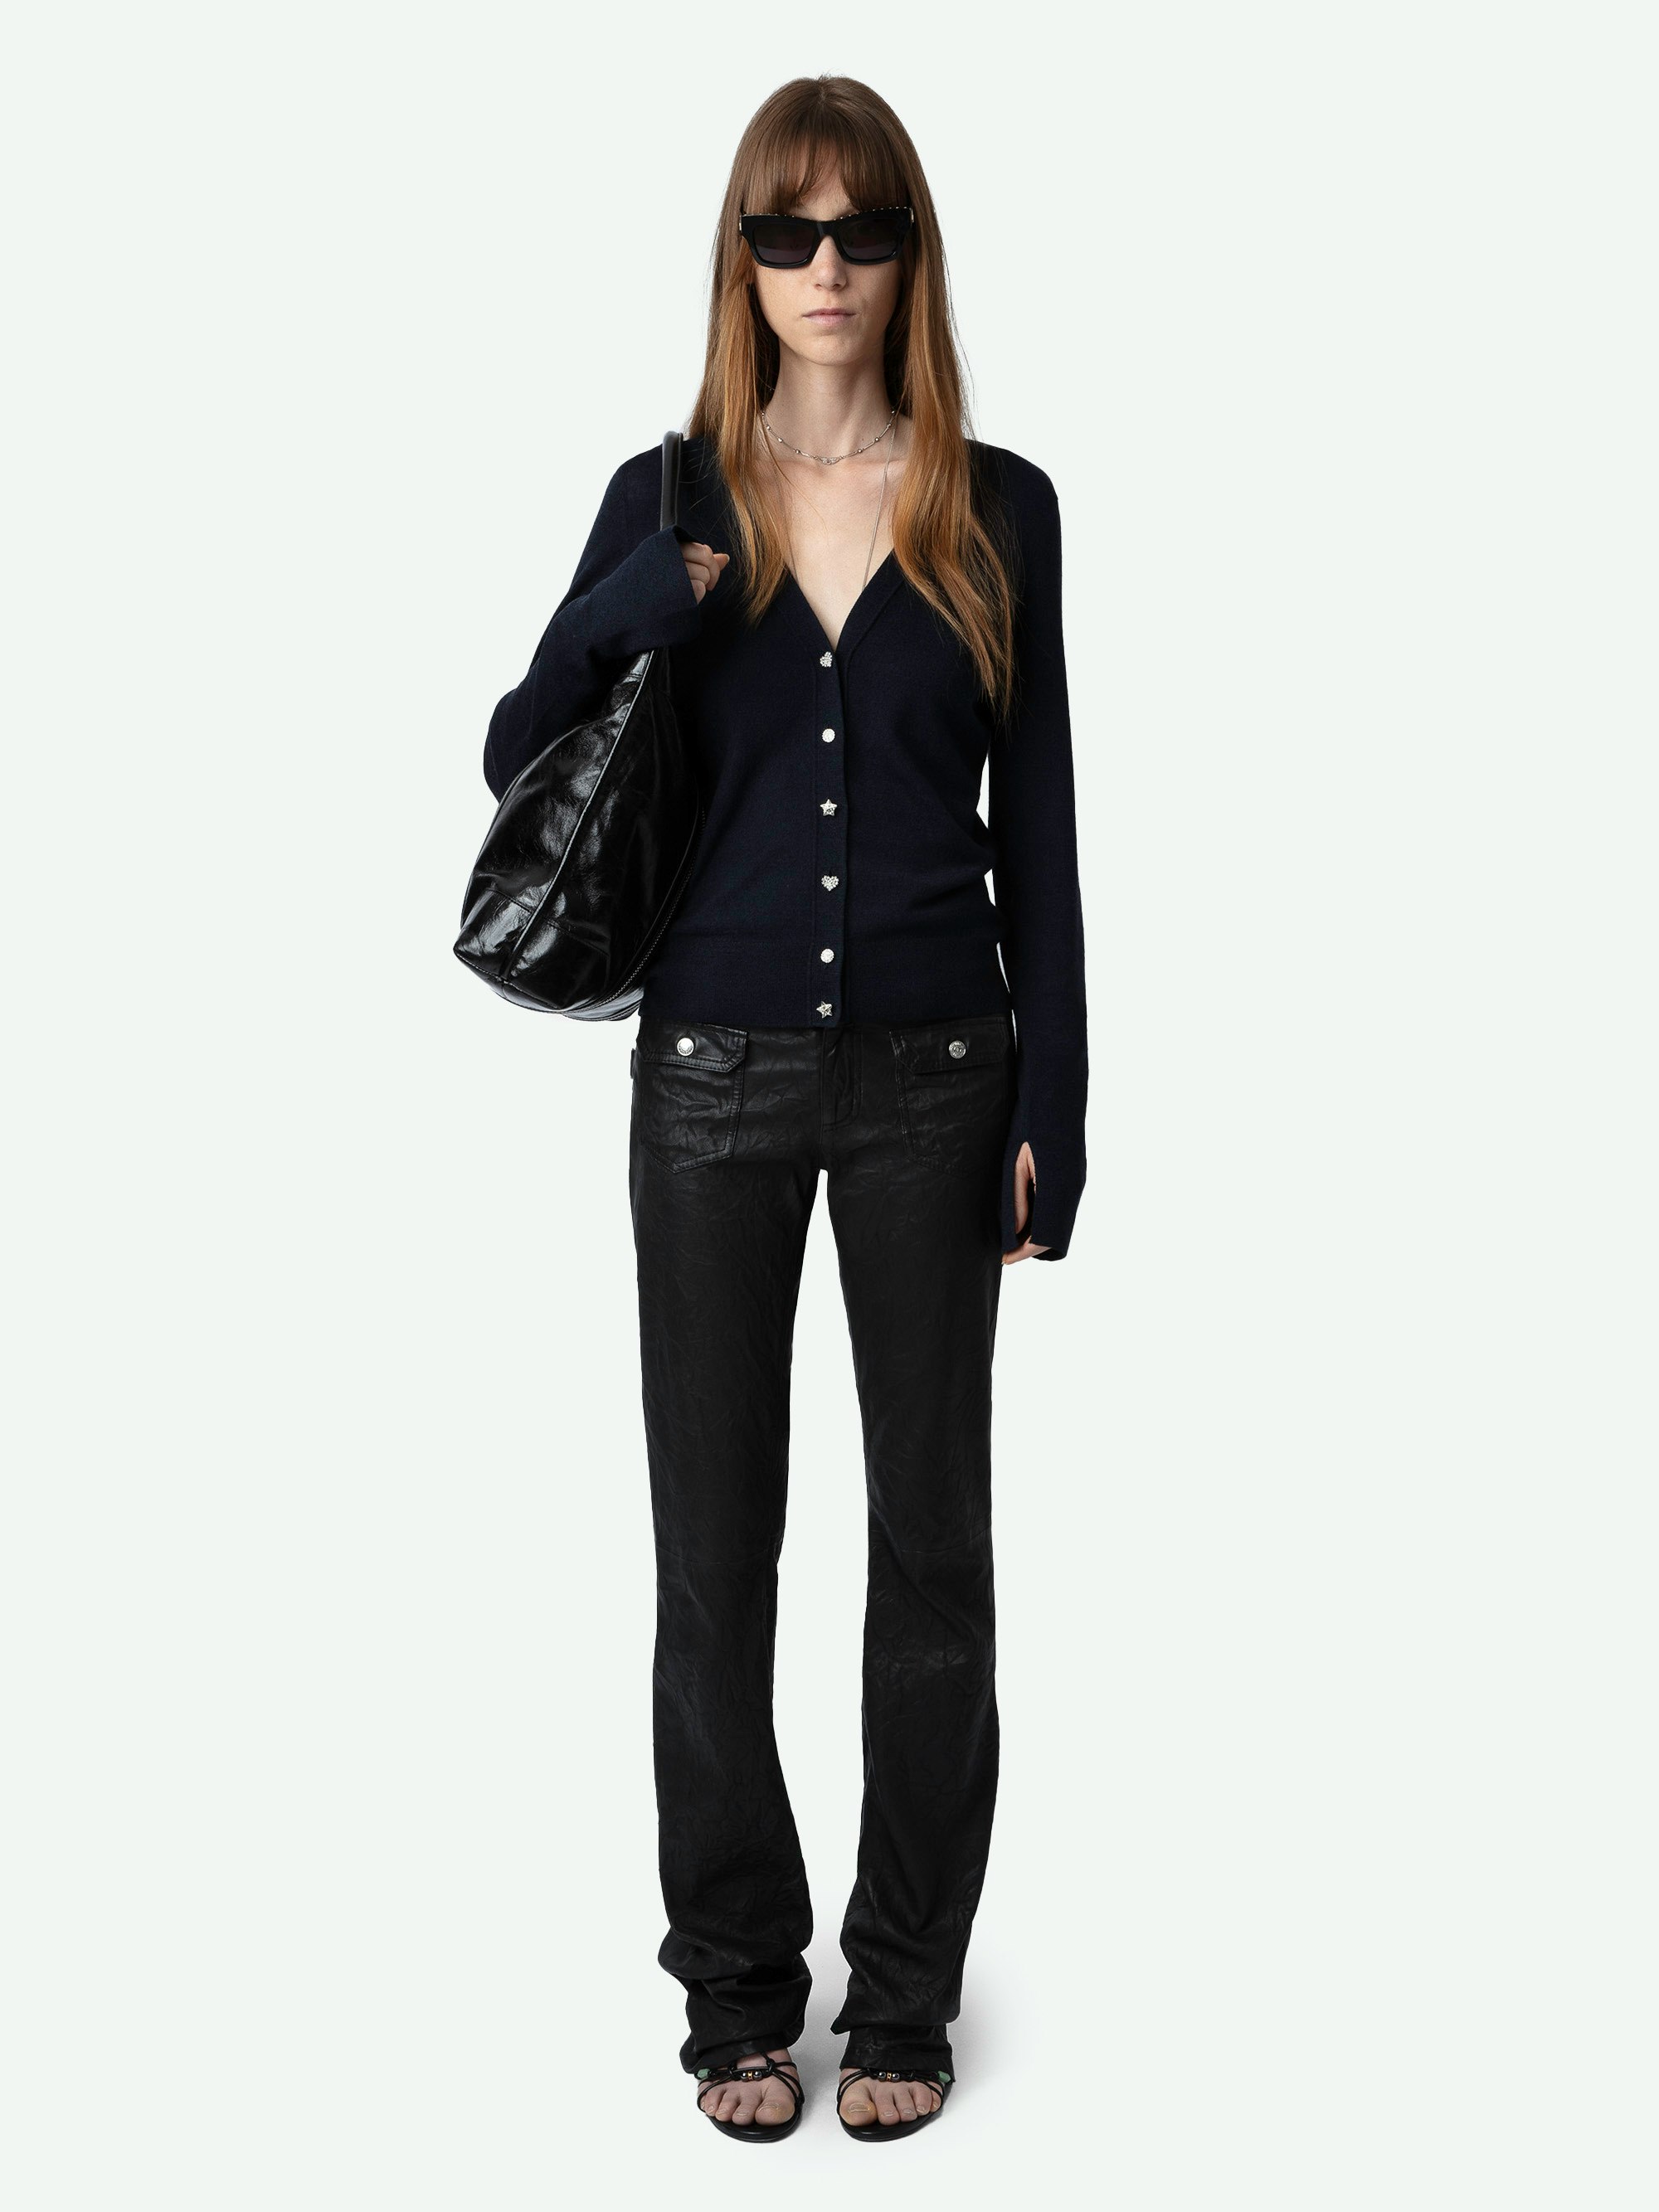 Jemma Cardigan 100% Merino Wool - Long-sleeved navy blue 100% merino wool cardigan with diamante buttons and wings embroidered on the back.